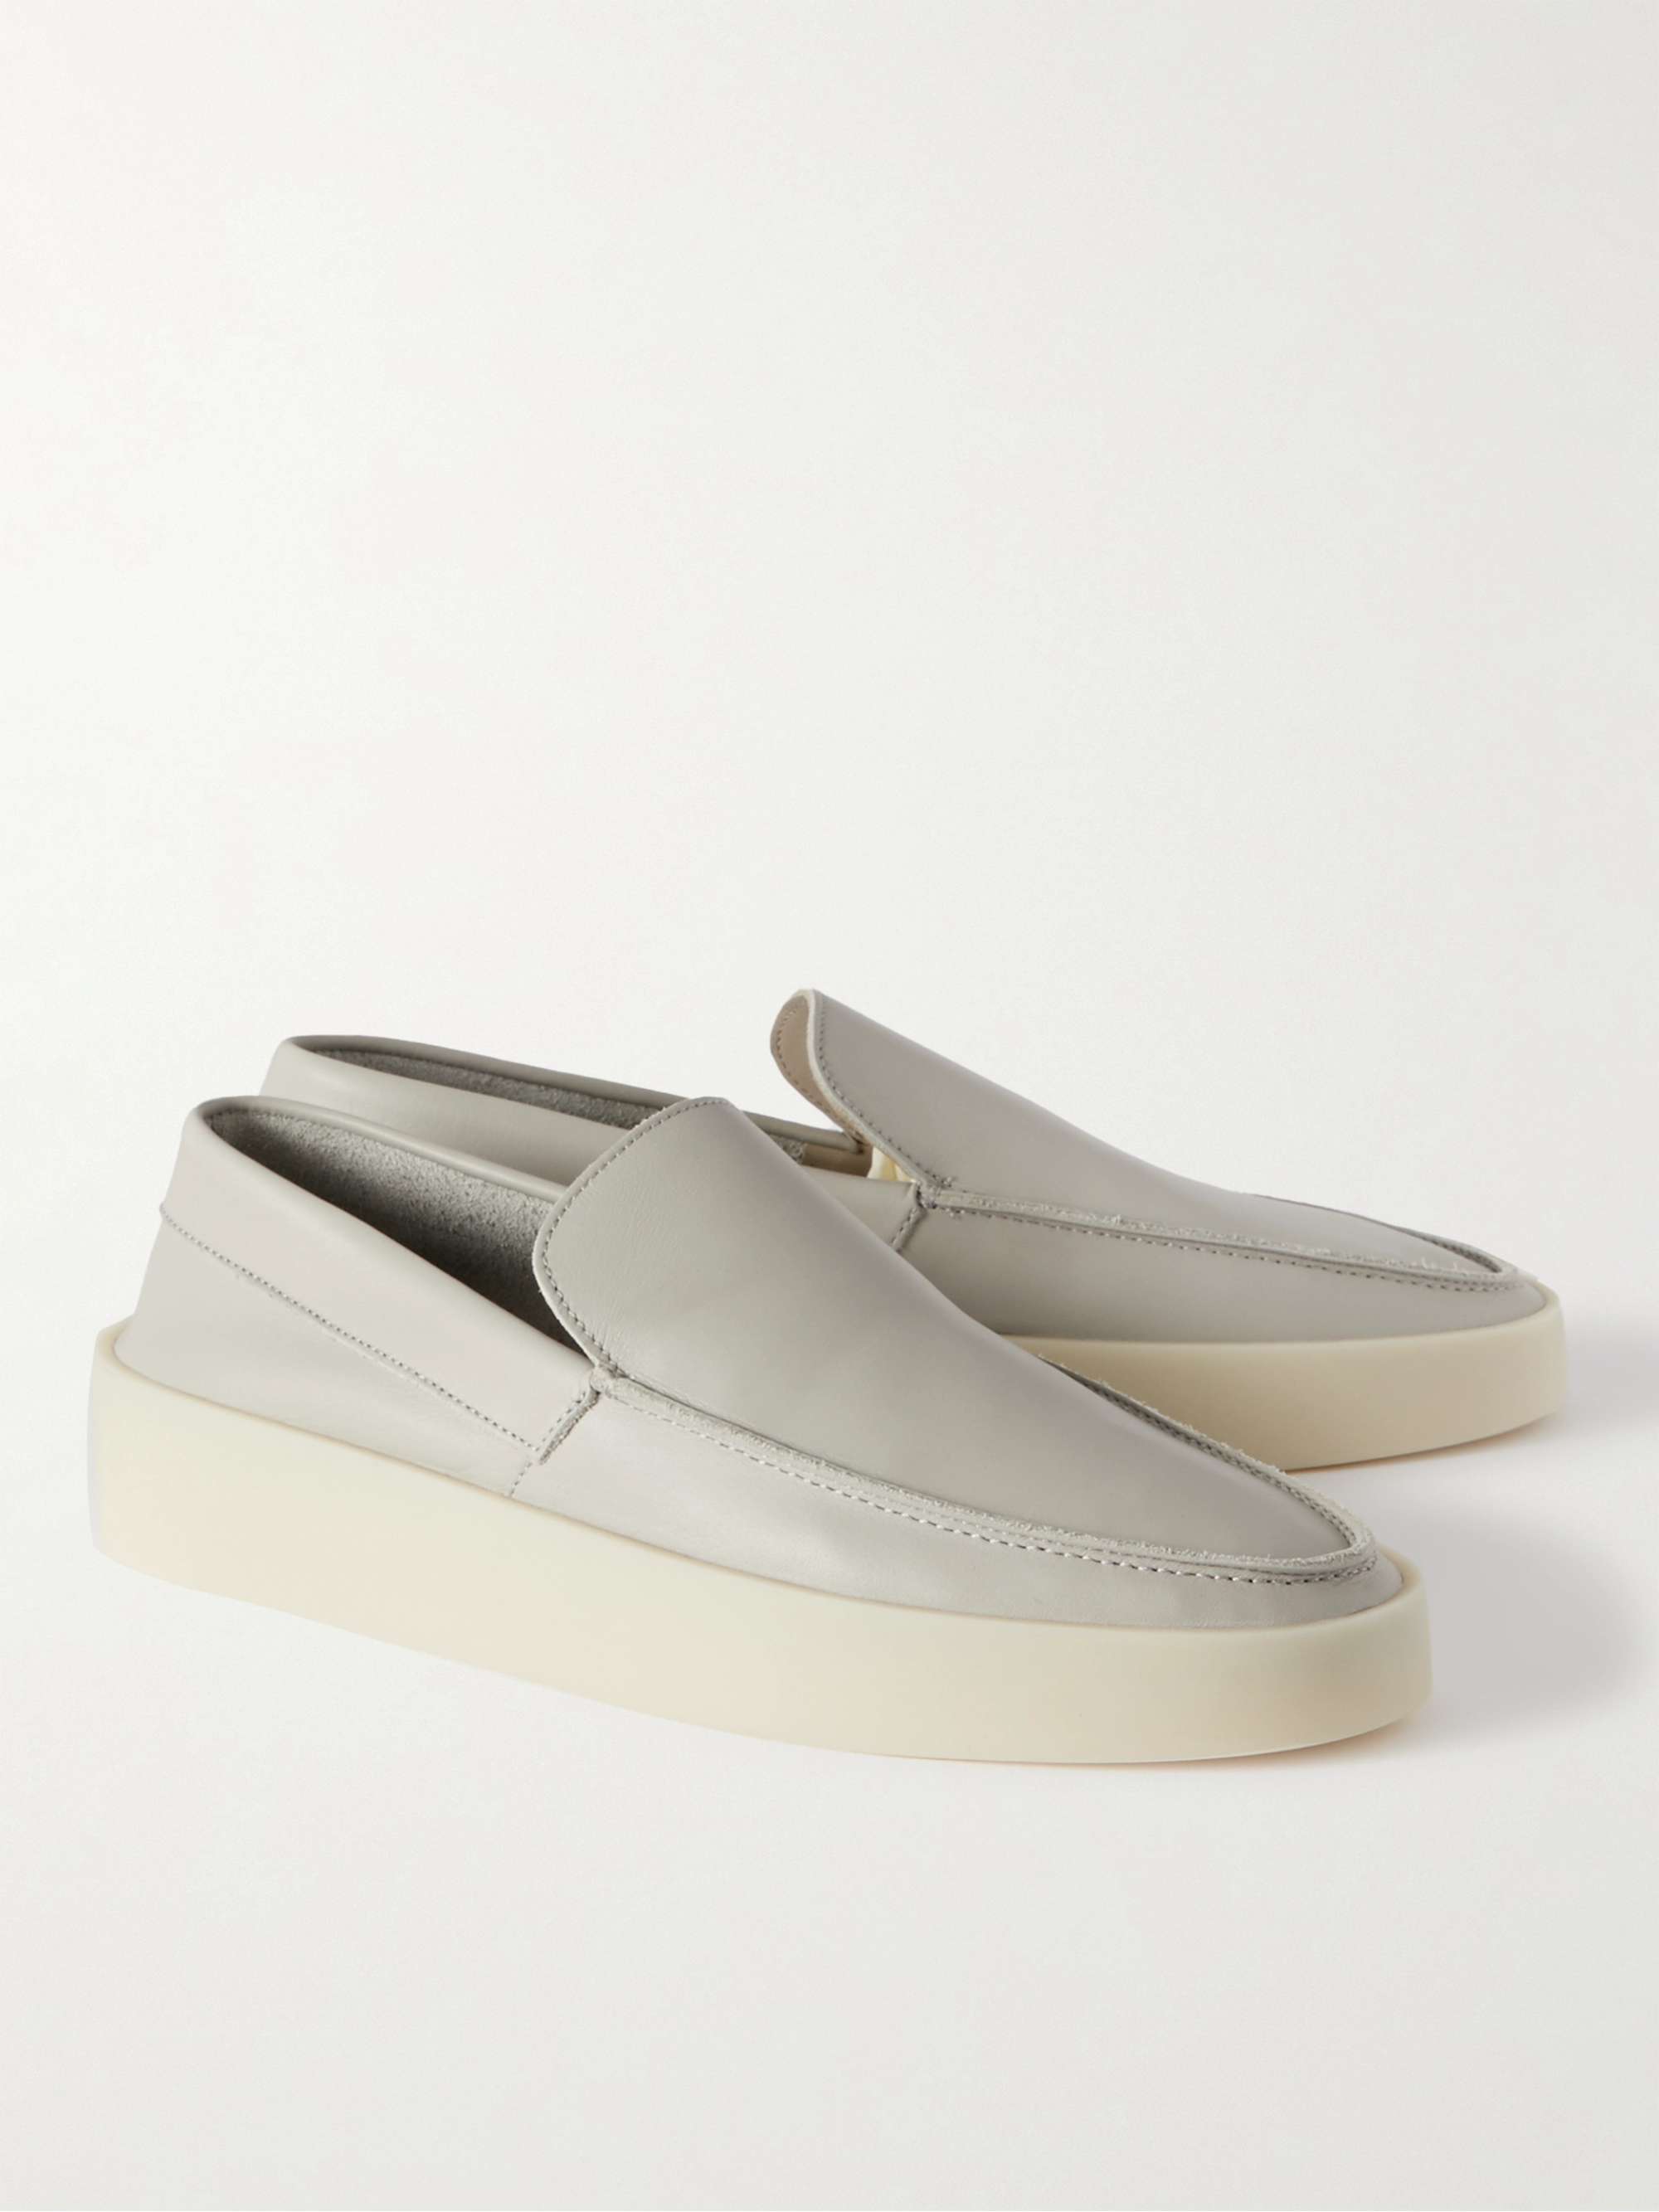 FEAR OF GOD Leather Loafers